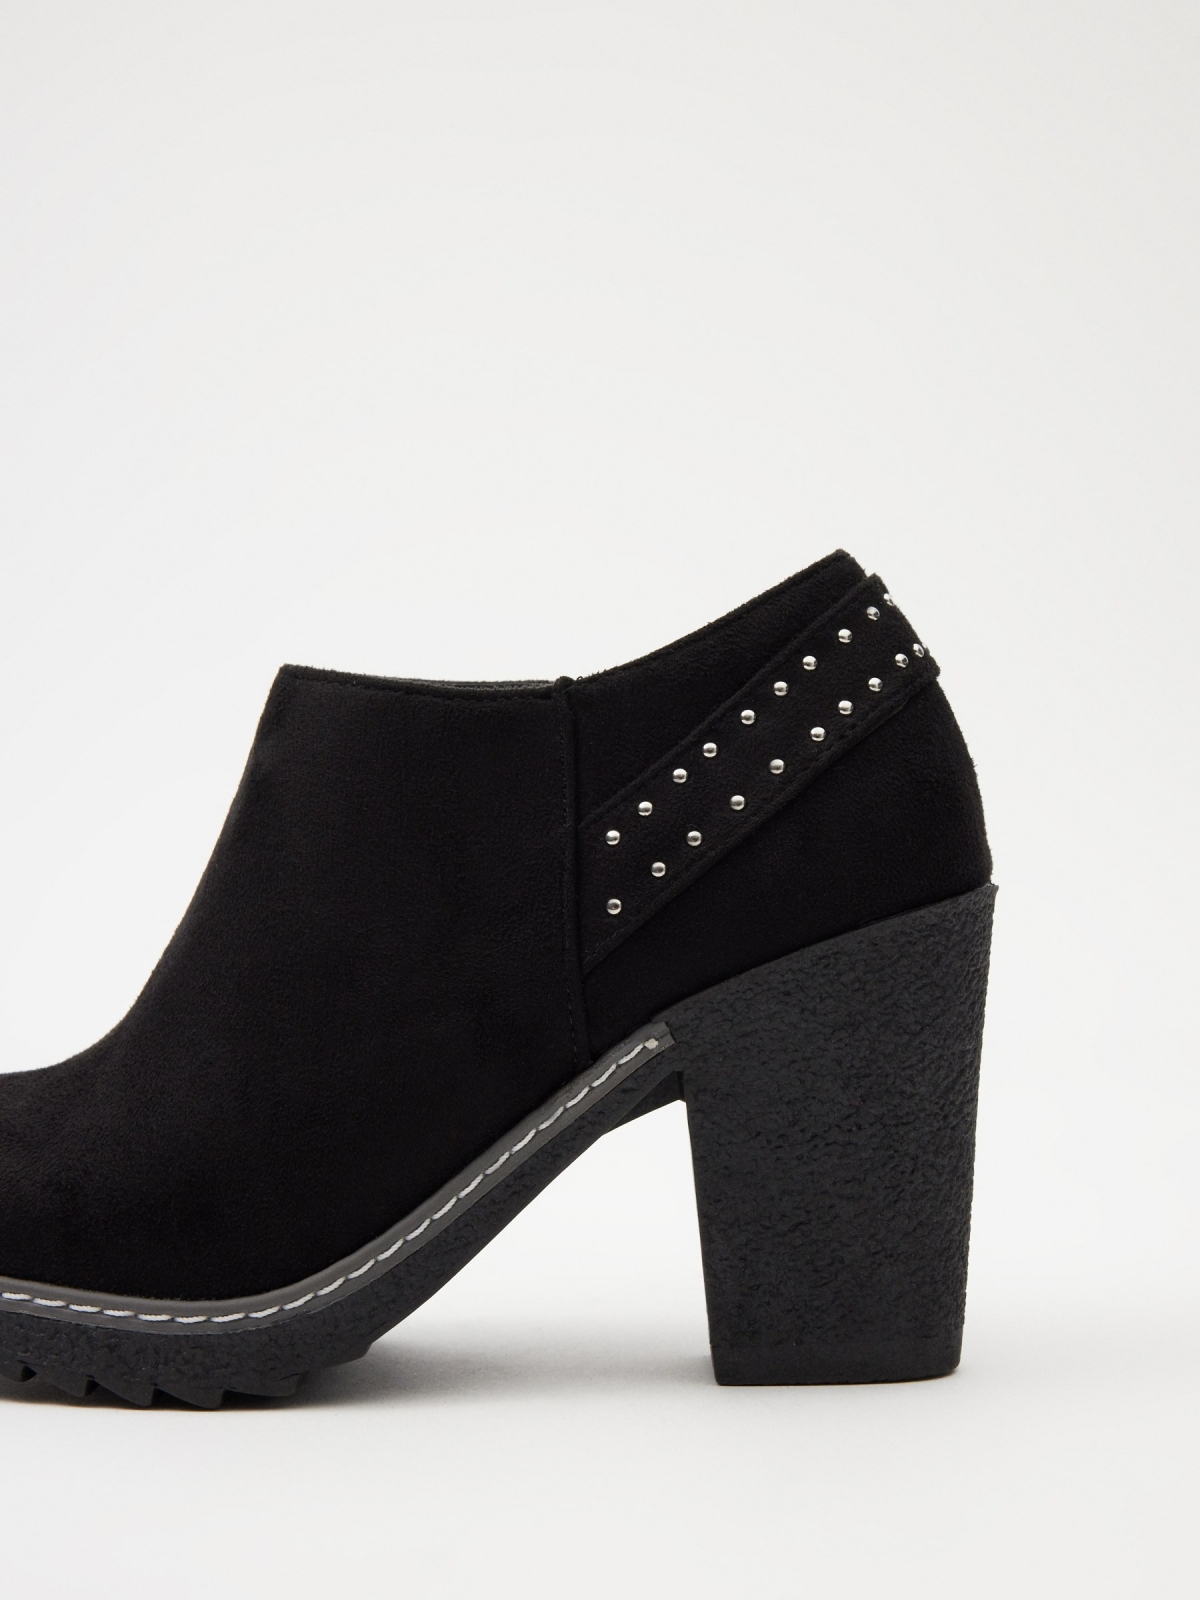 Studded ankle boots with wide heel detail view